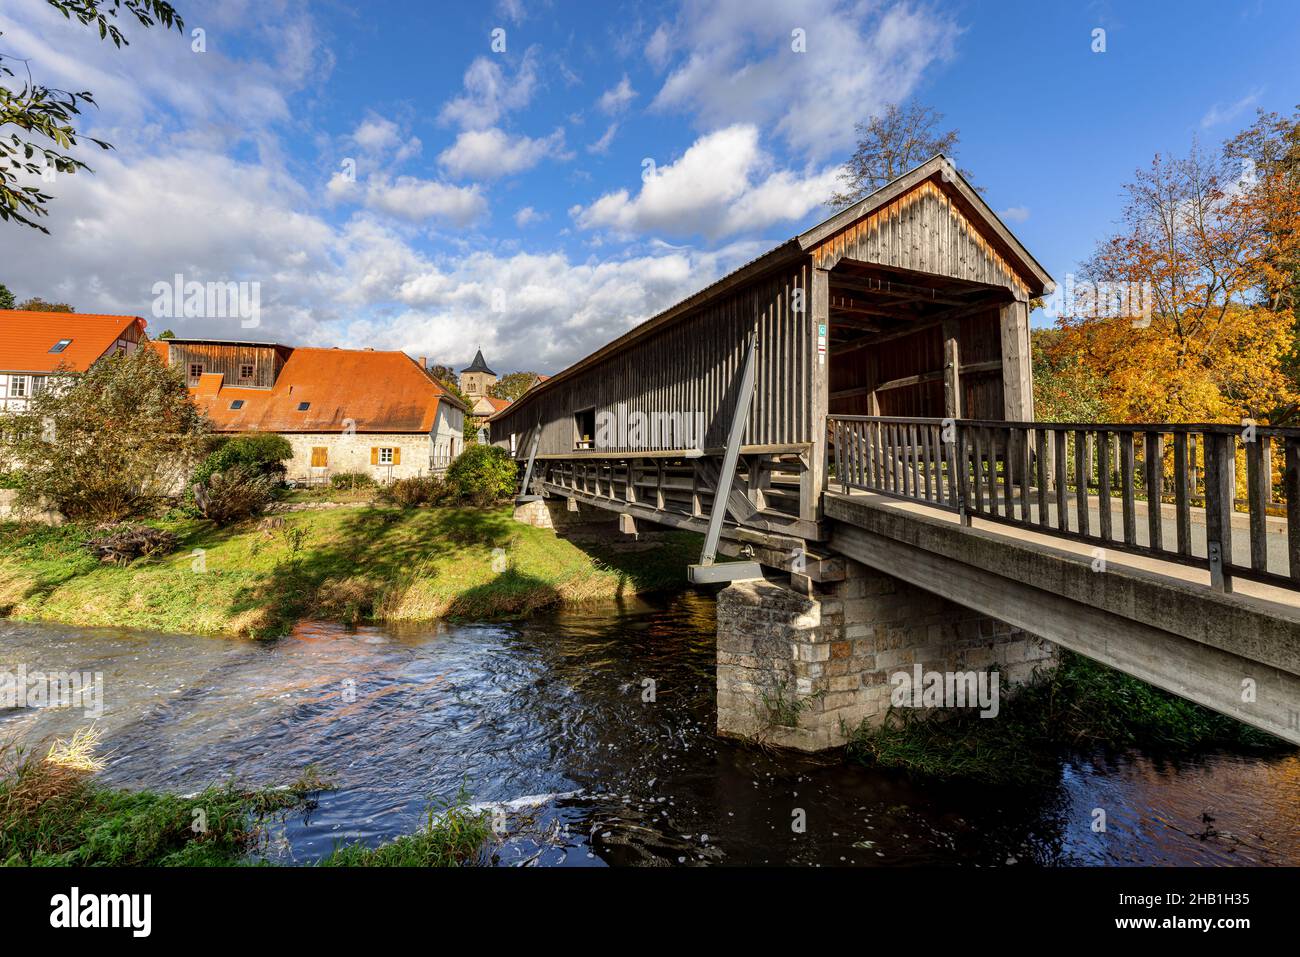 Roofed wooden bridge over the river Ilm in Buchfart, Thuringia, Germany. Stock Photo